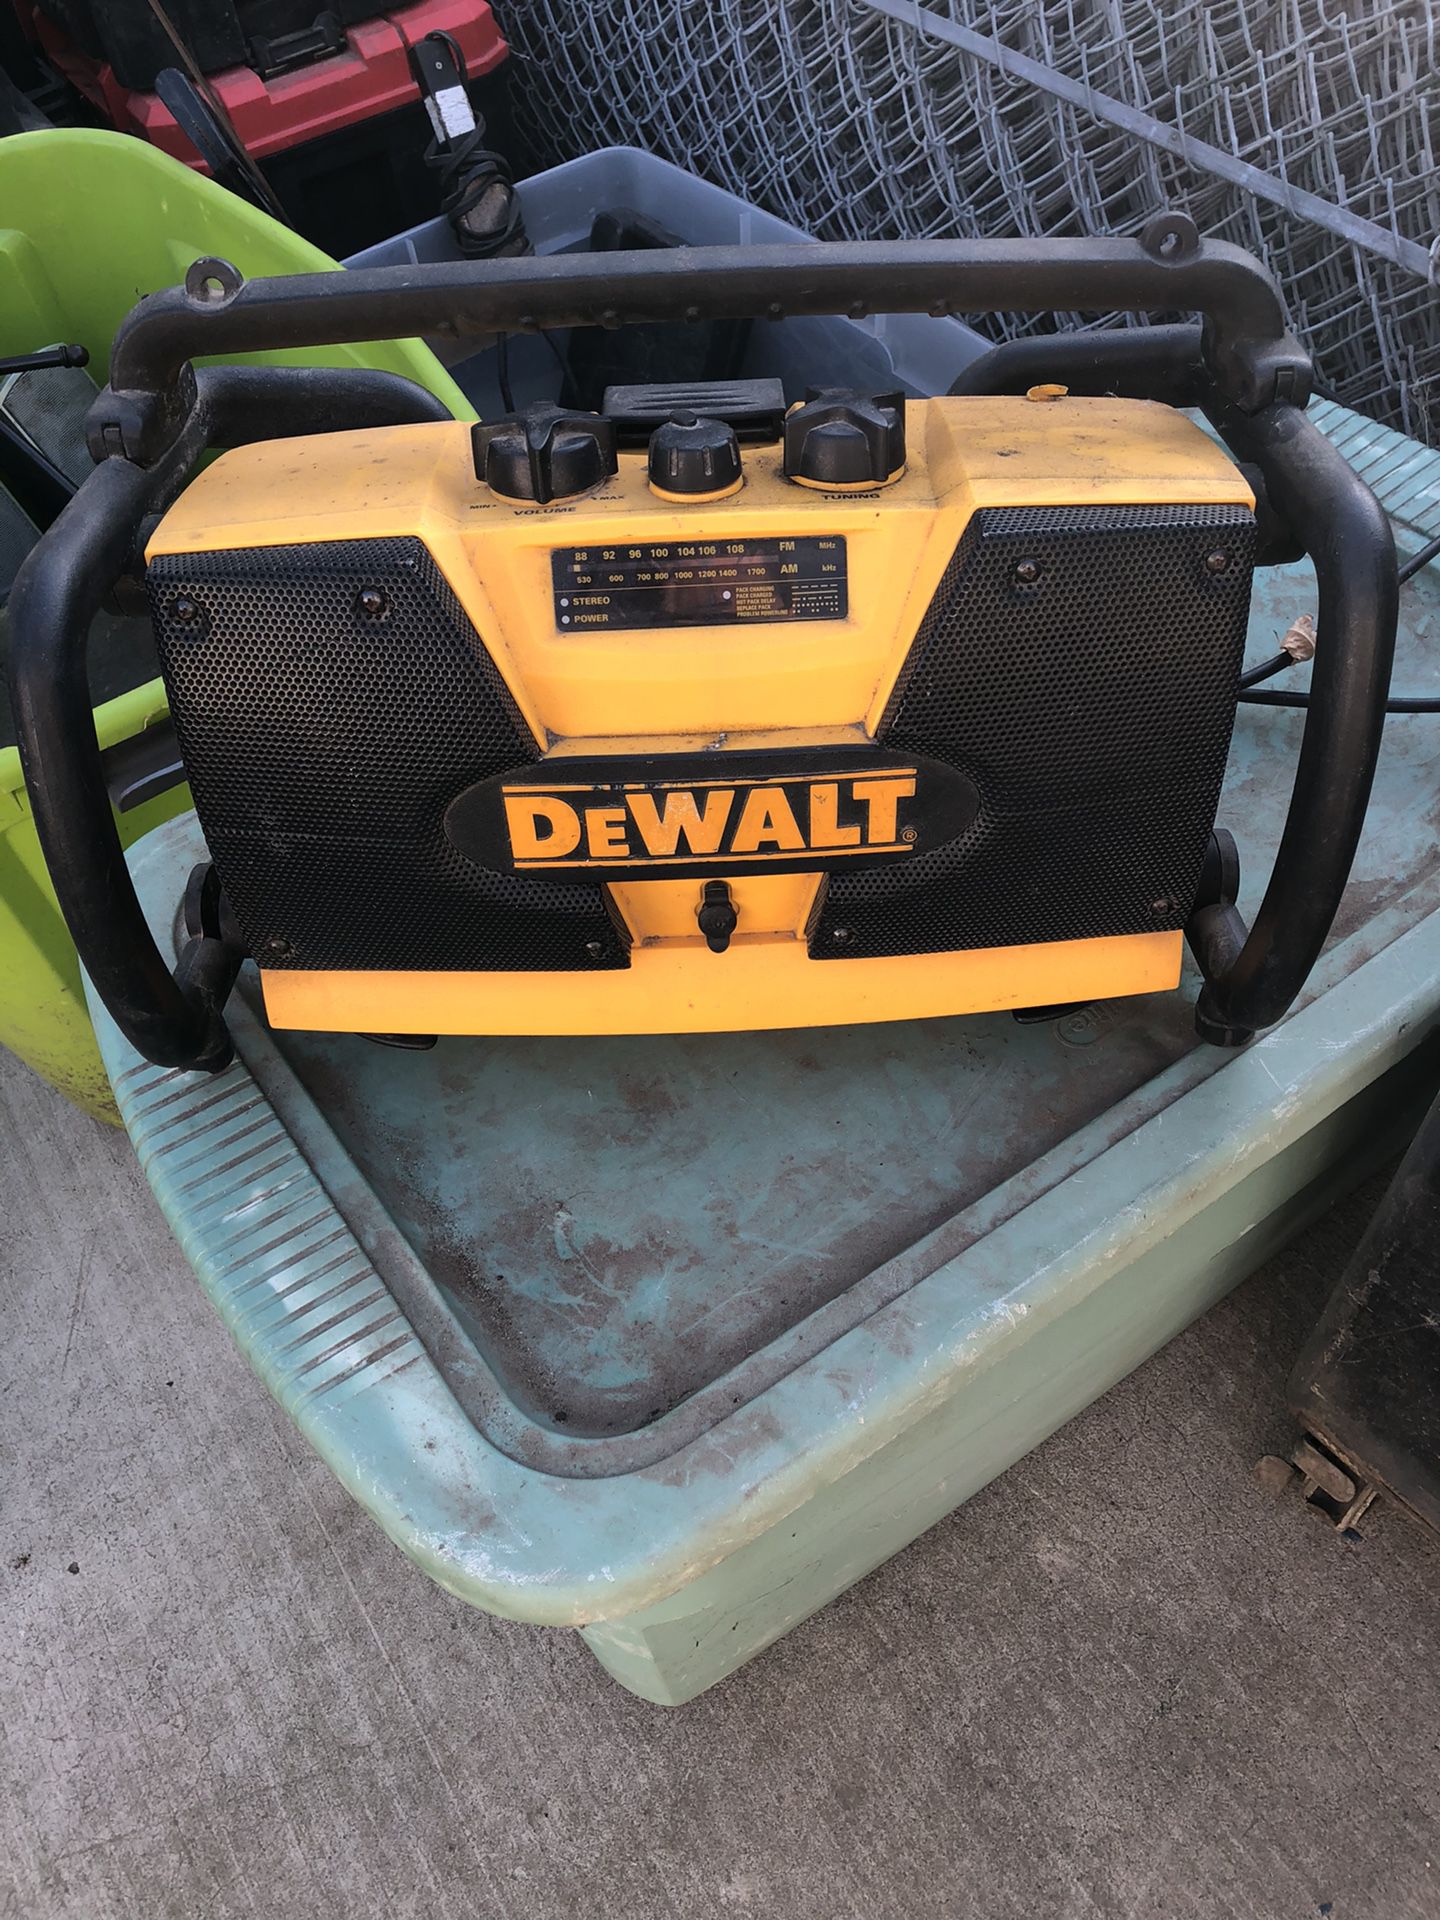 Dewalt radio and battery charger (missing antenna)